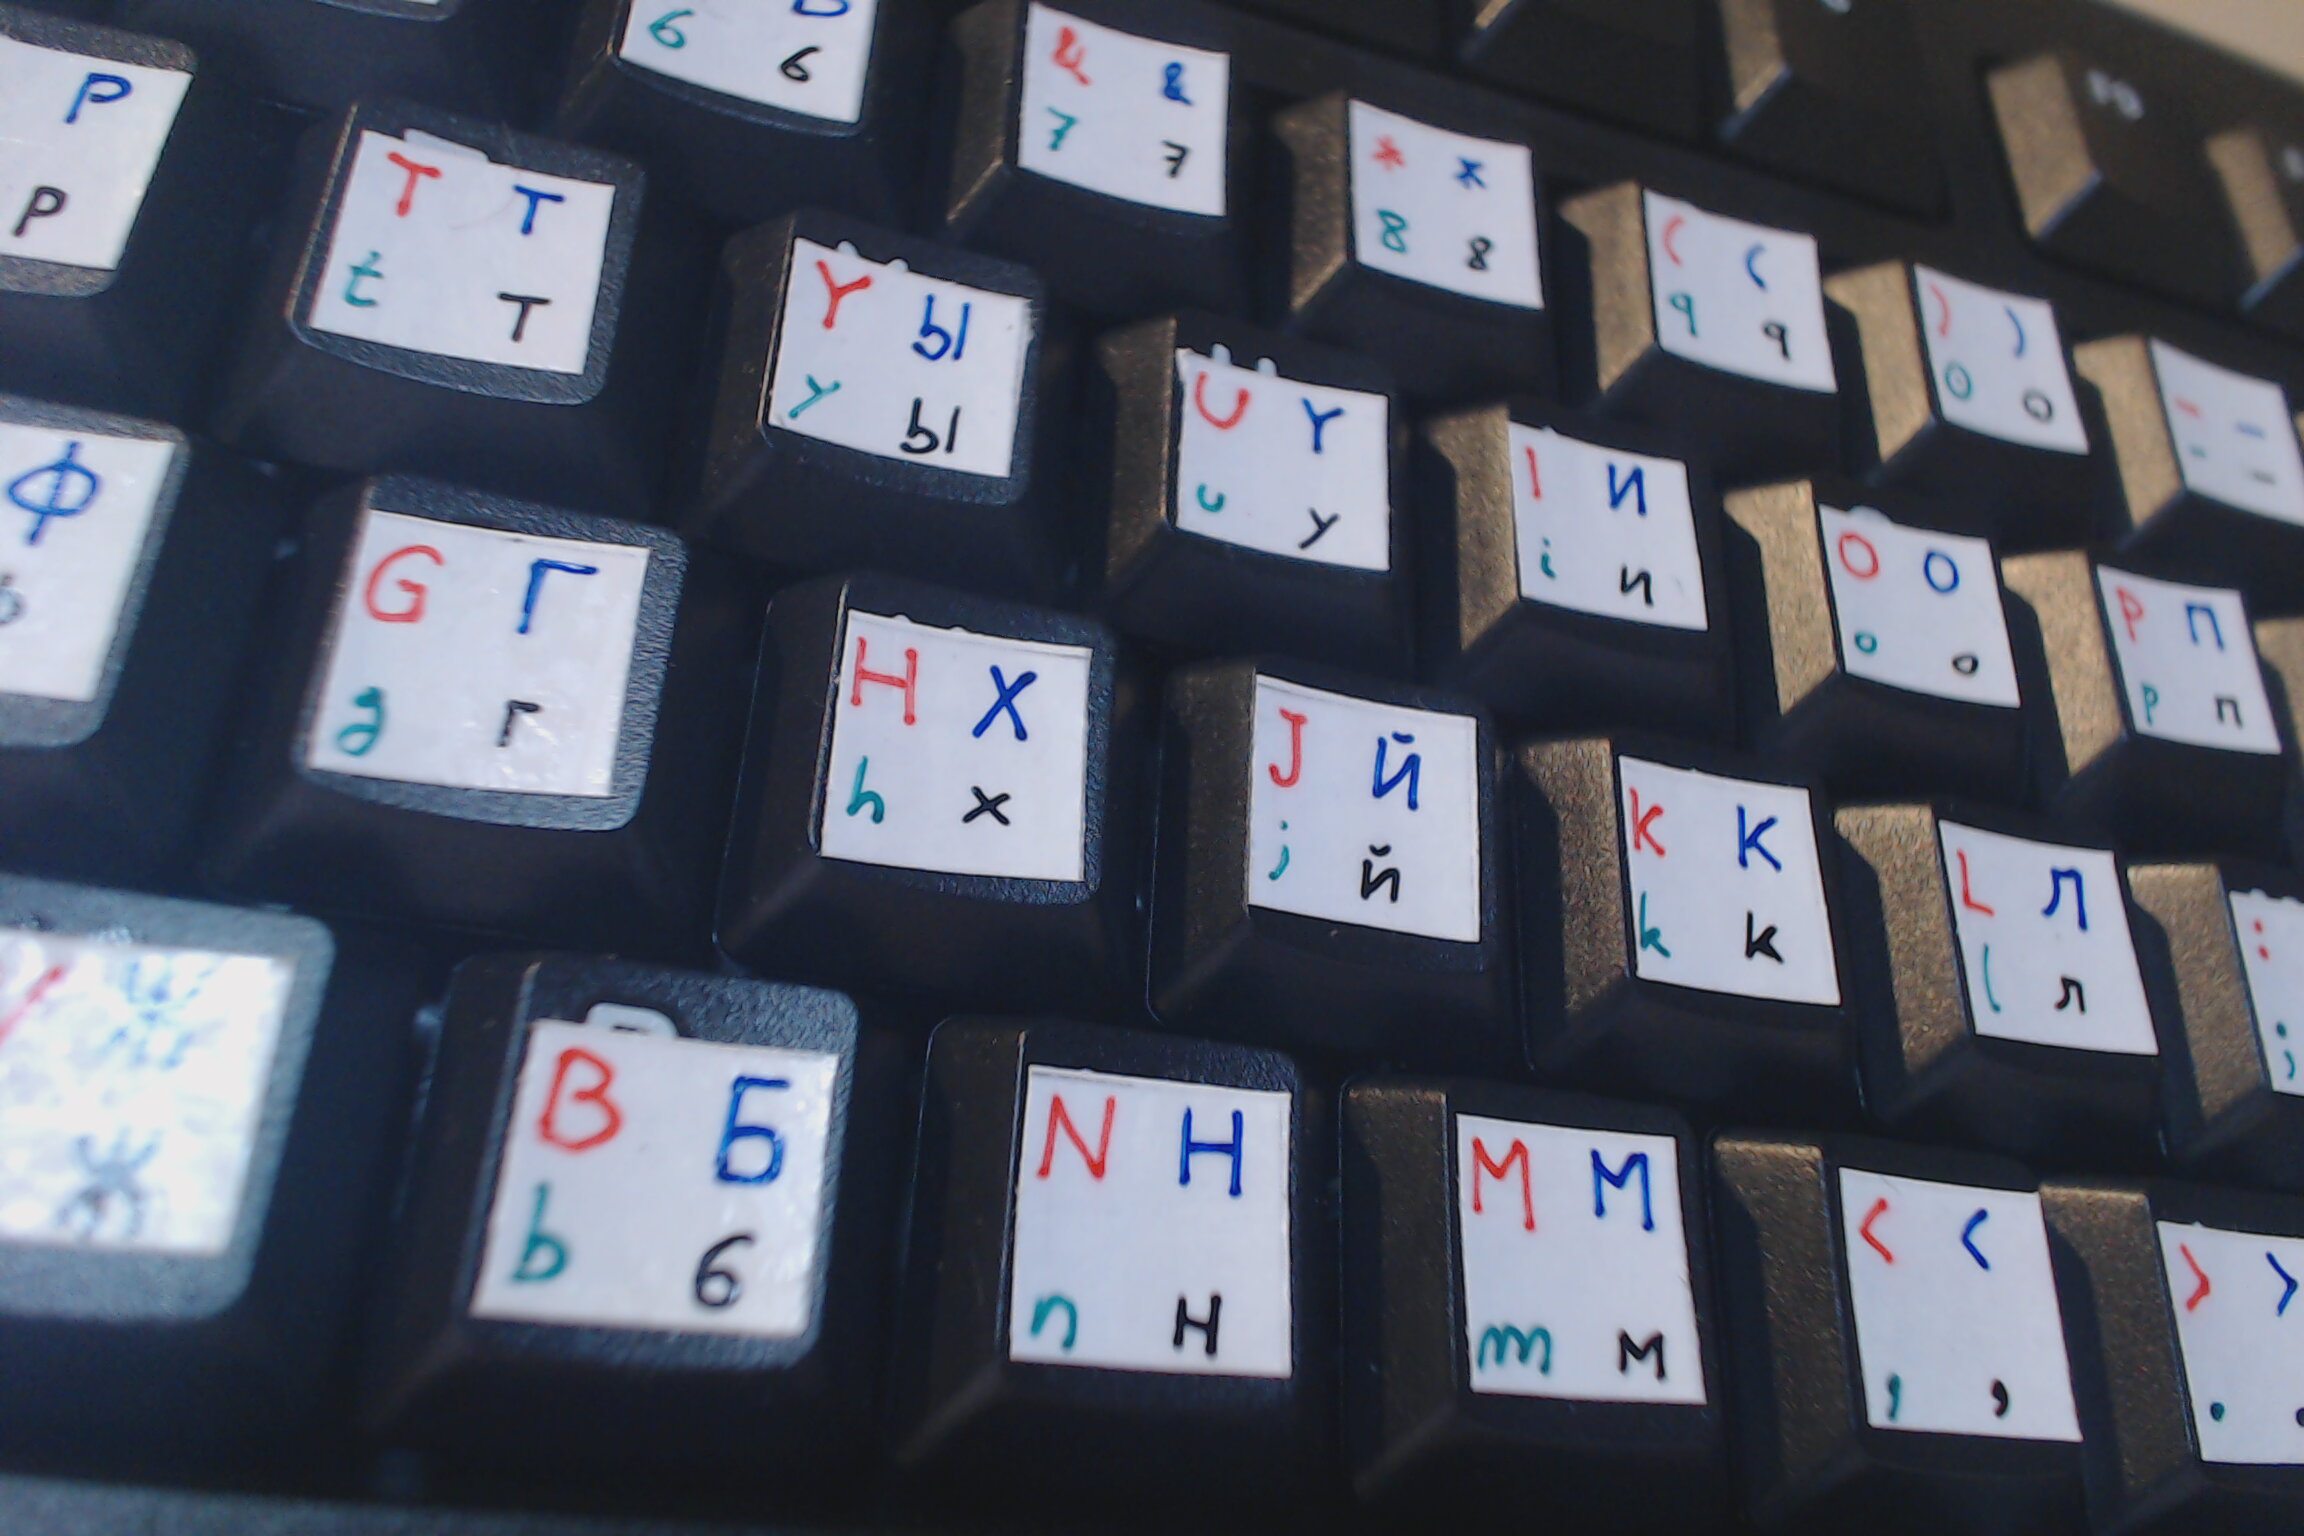 My hand-made Russian (phonetic) keyboards, image 10 of 14